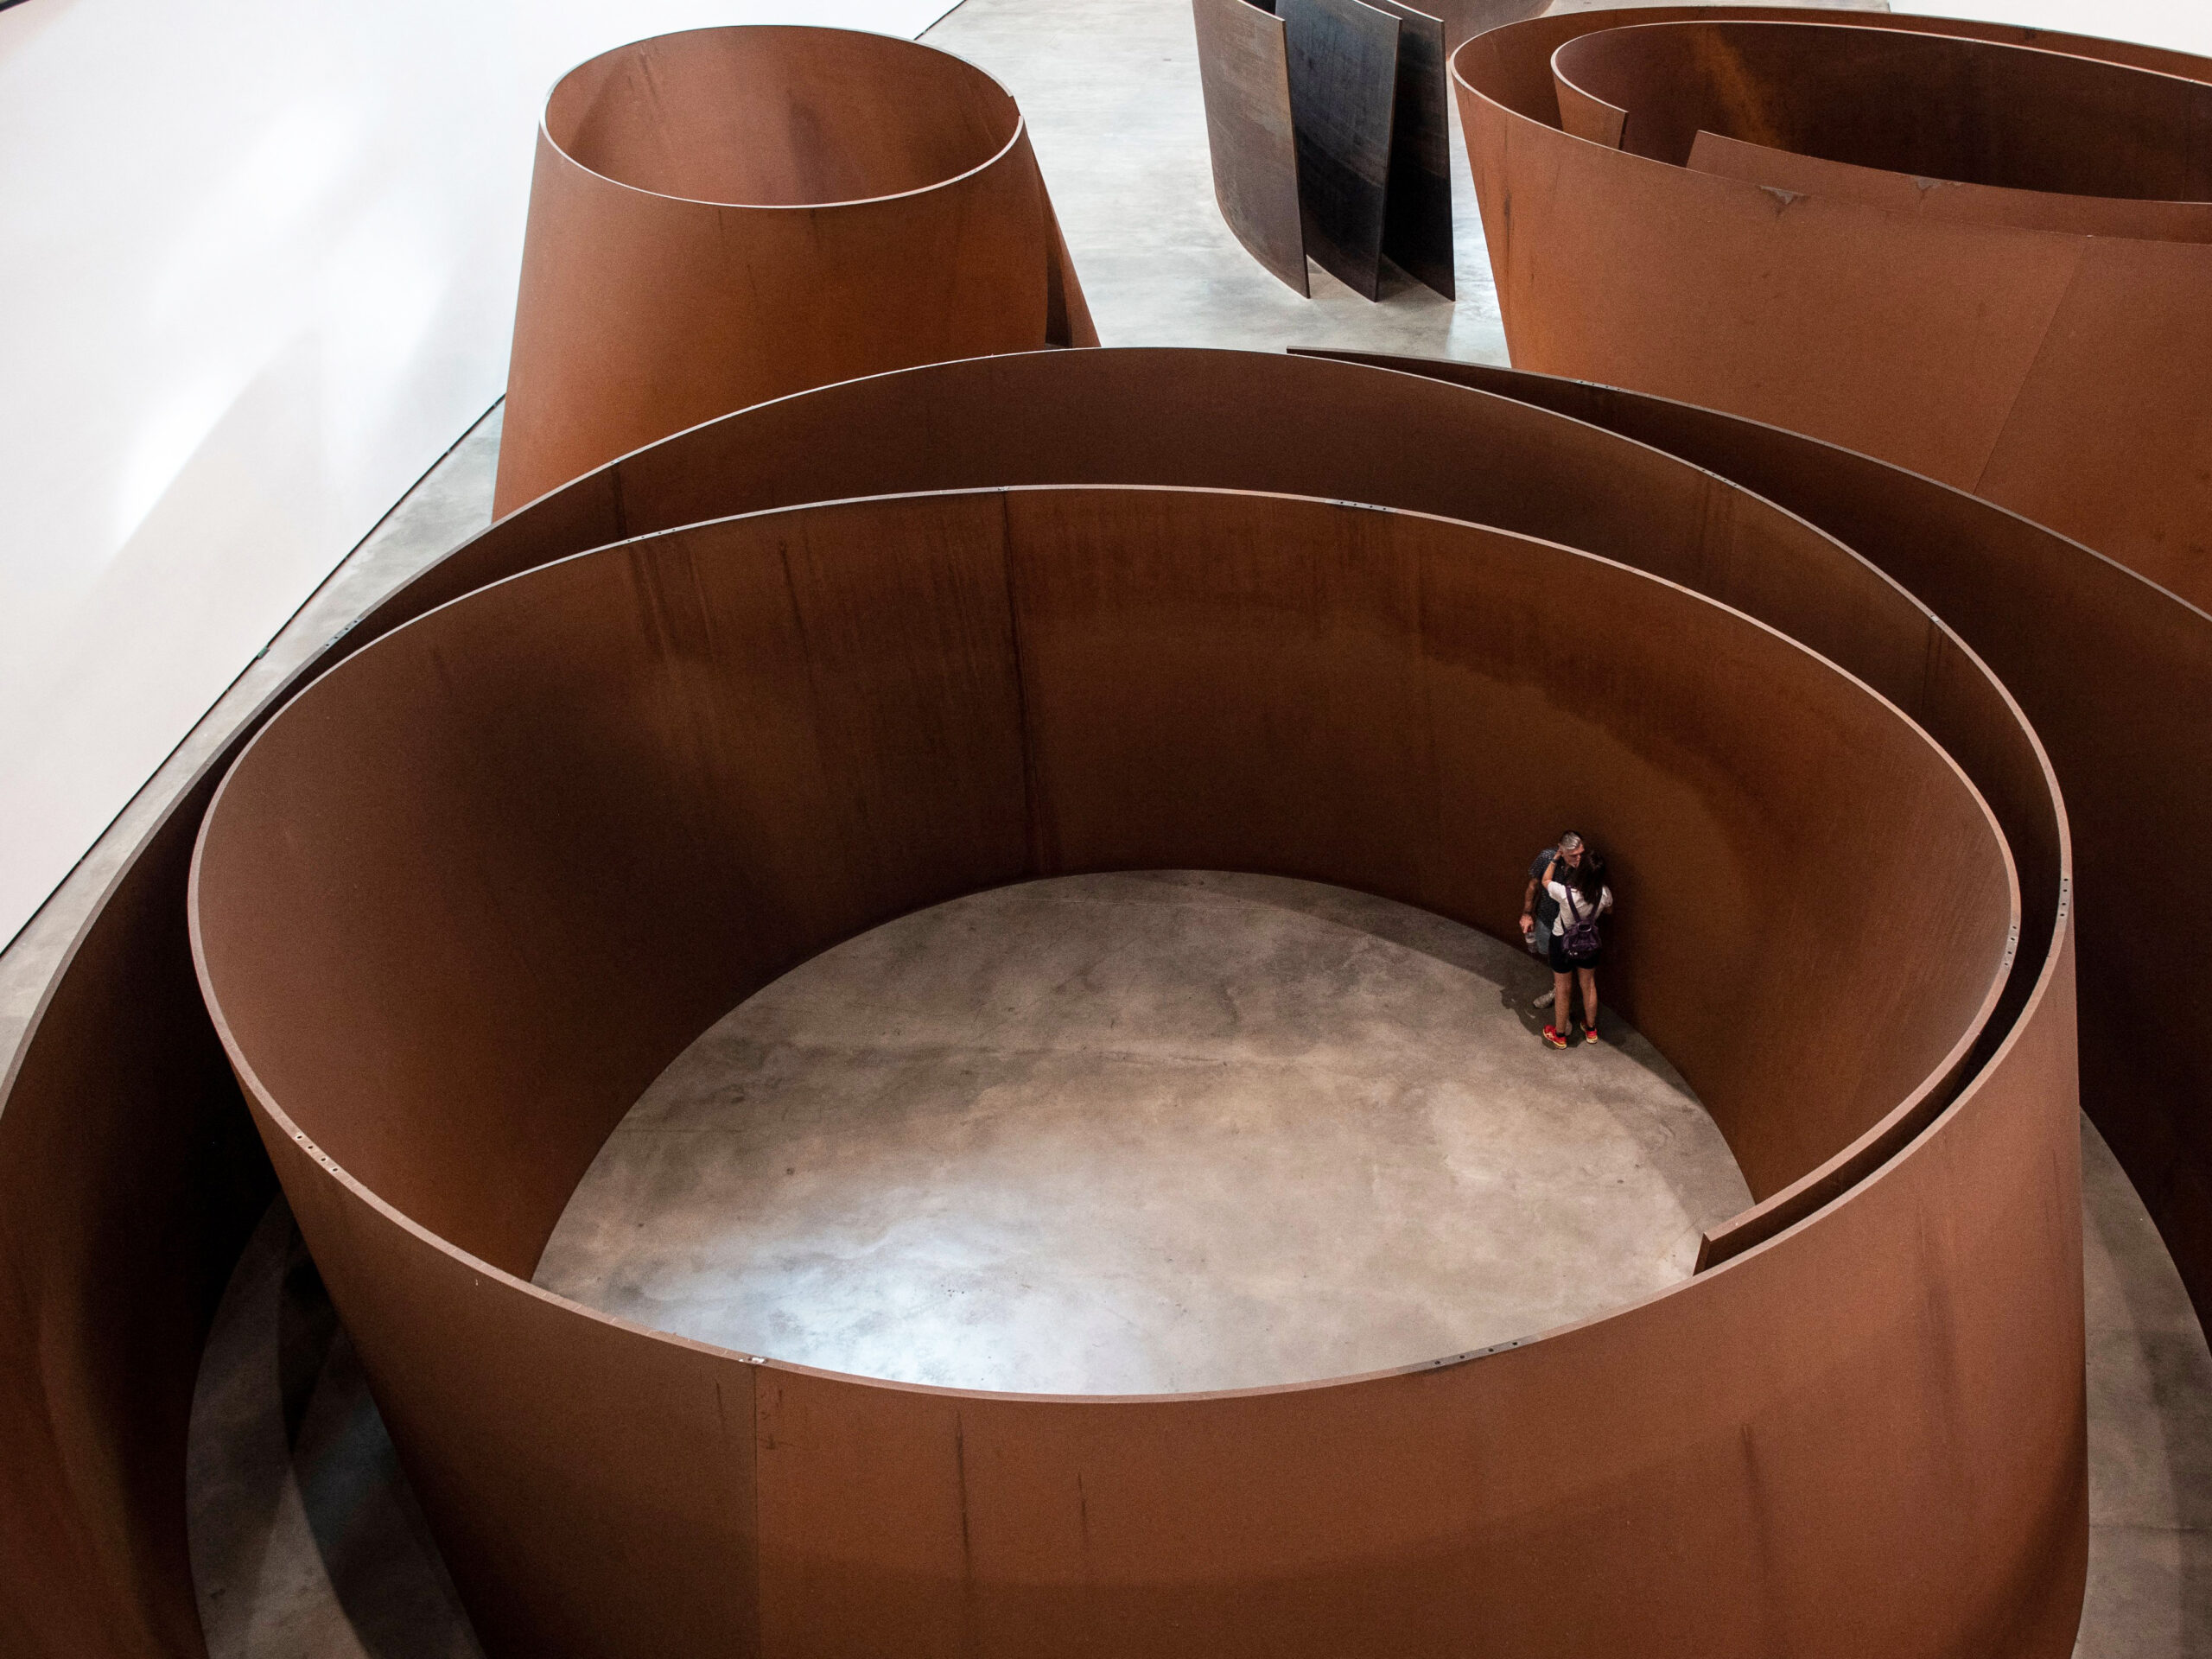 Photos: Remembering Richard Serra, a world-renowned ‘poet’ of metals